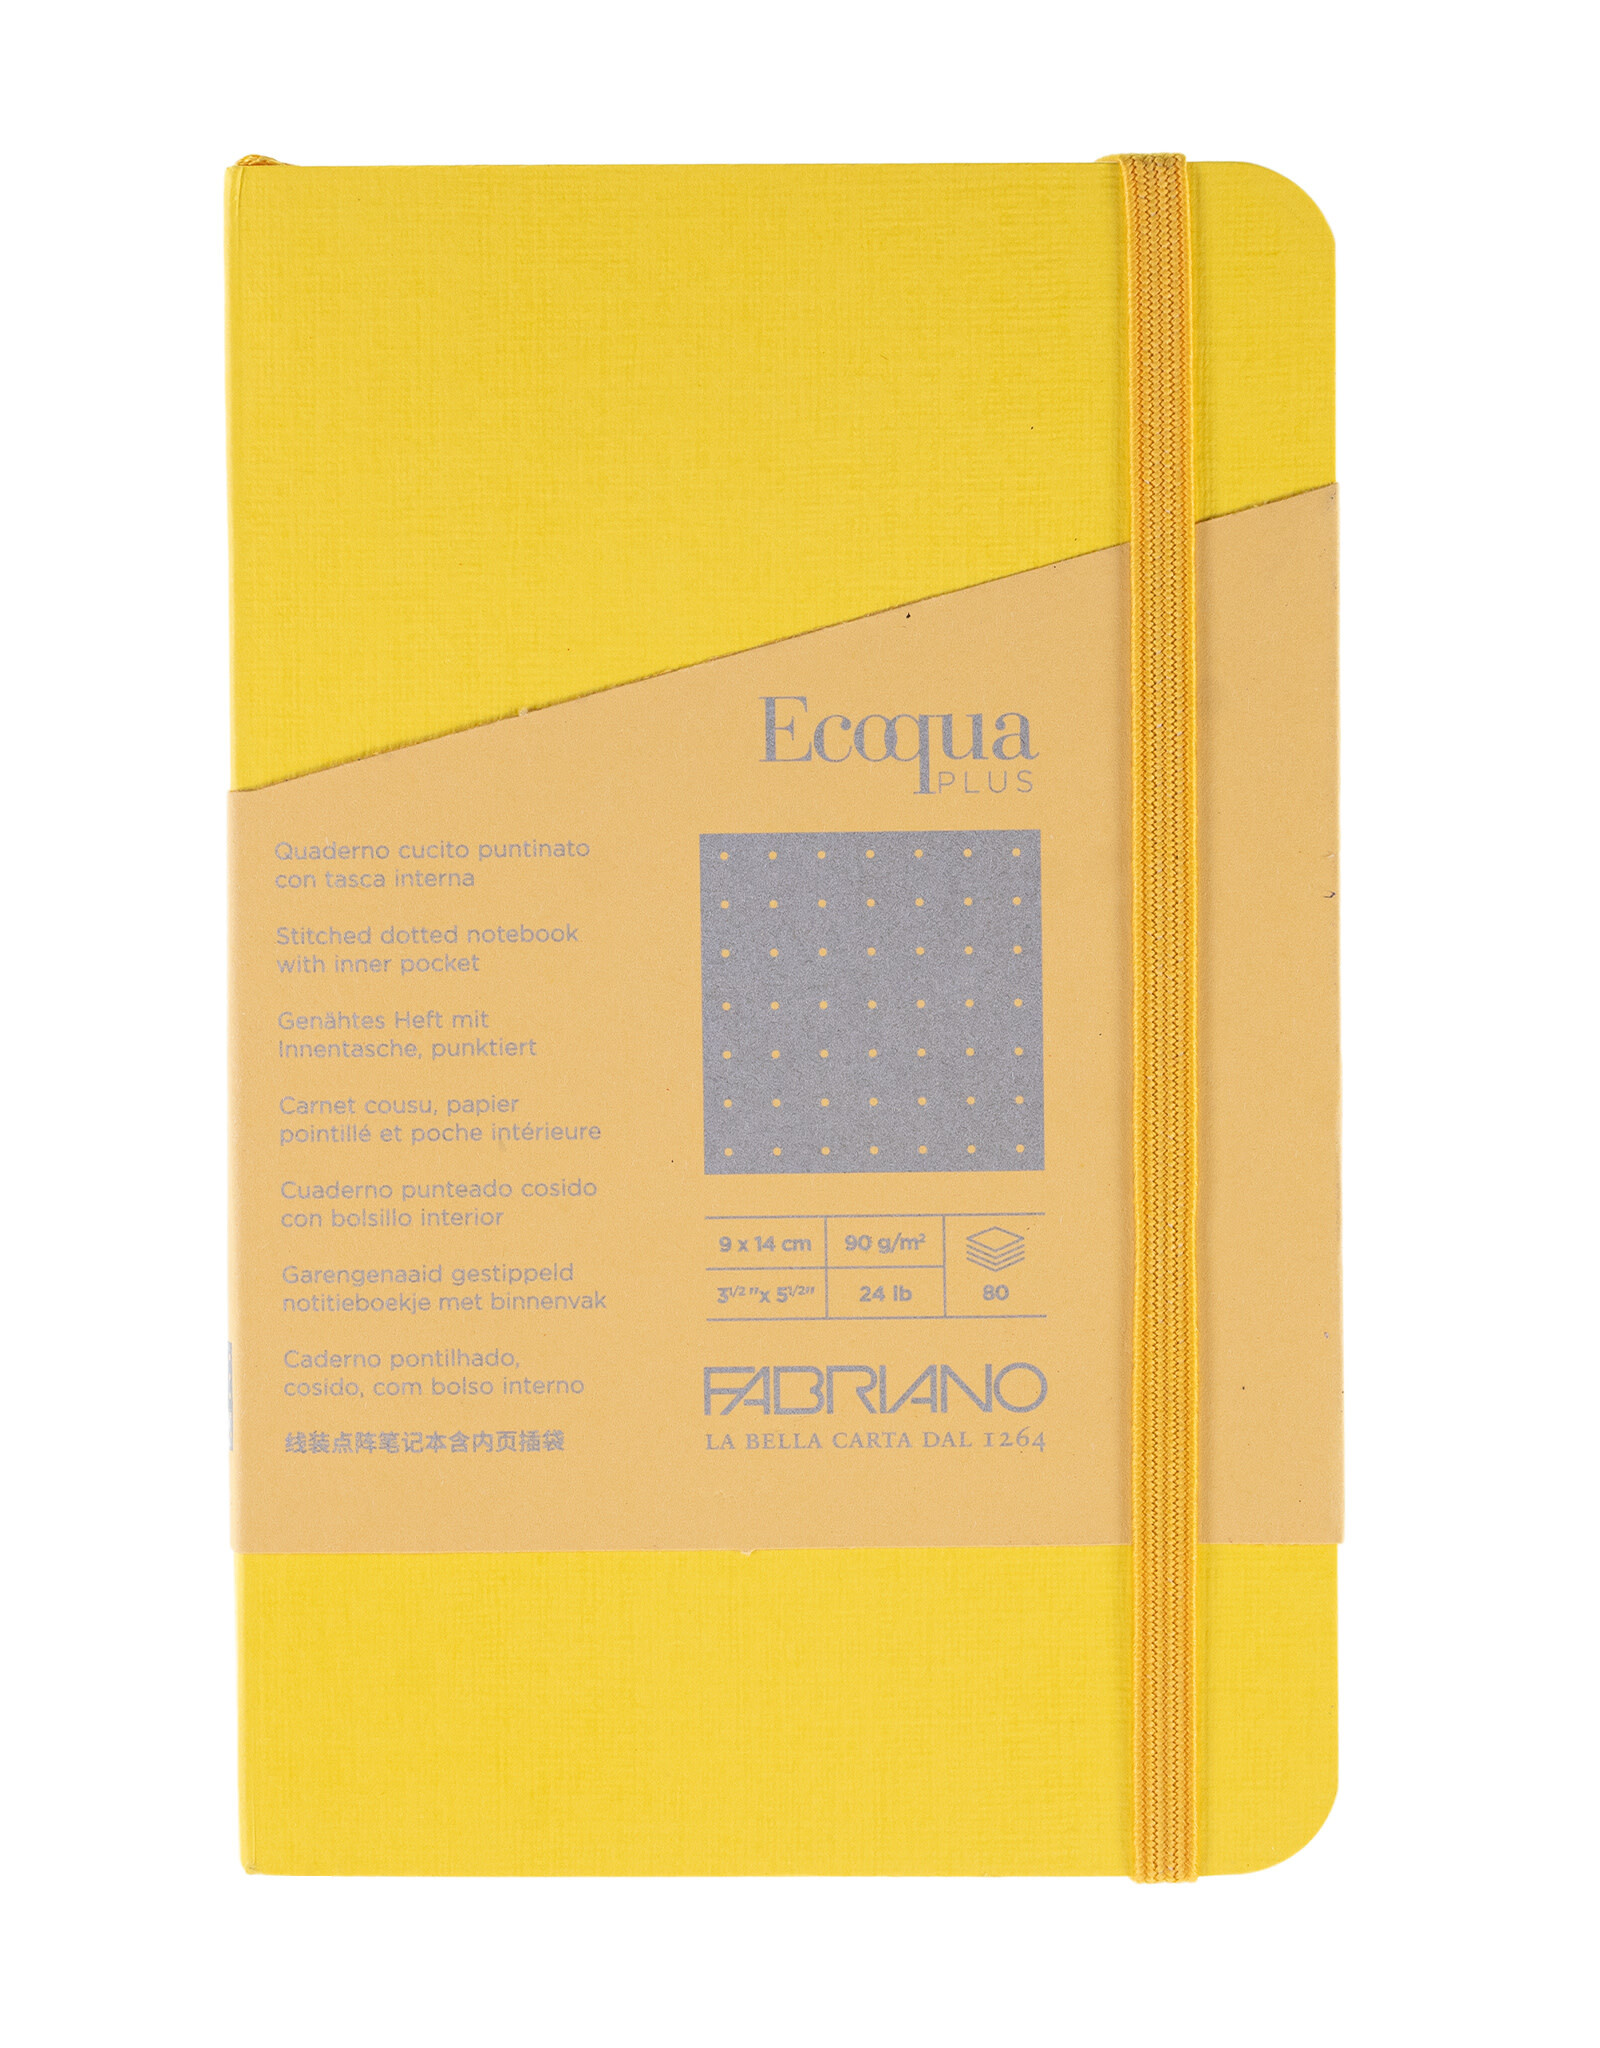 Ecoqua Plus Sewn Spine Notebook, Yellow, 3.5” x 5.5”, Dotted